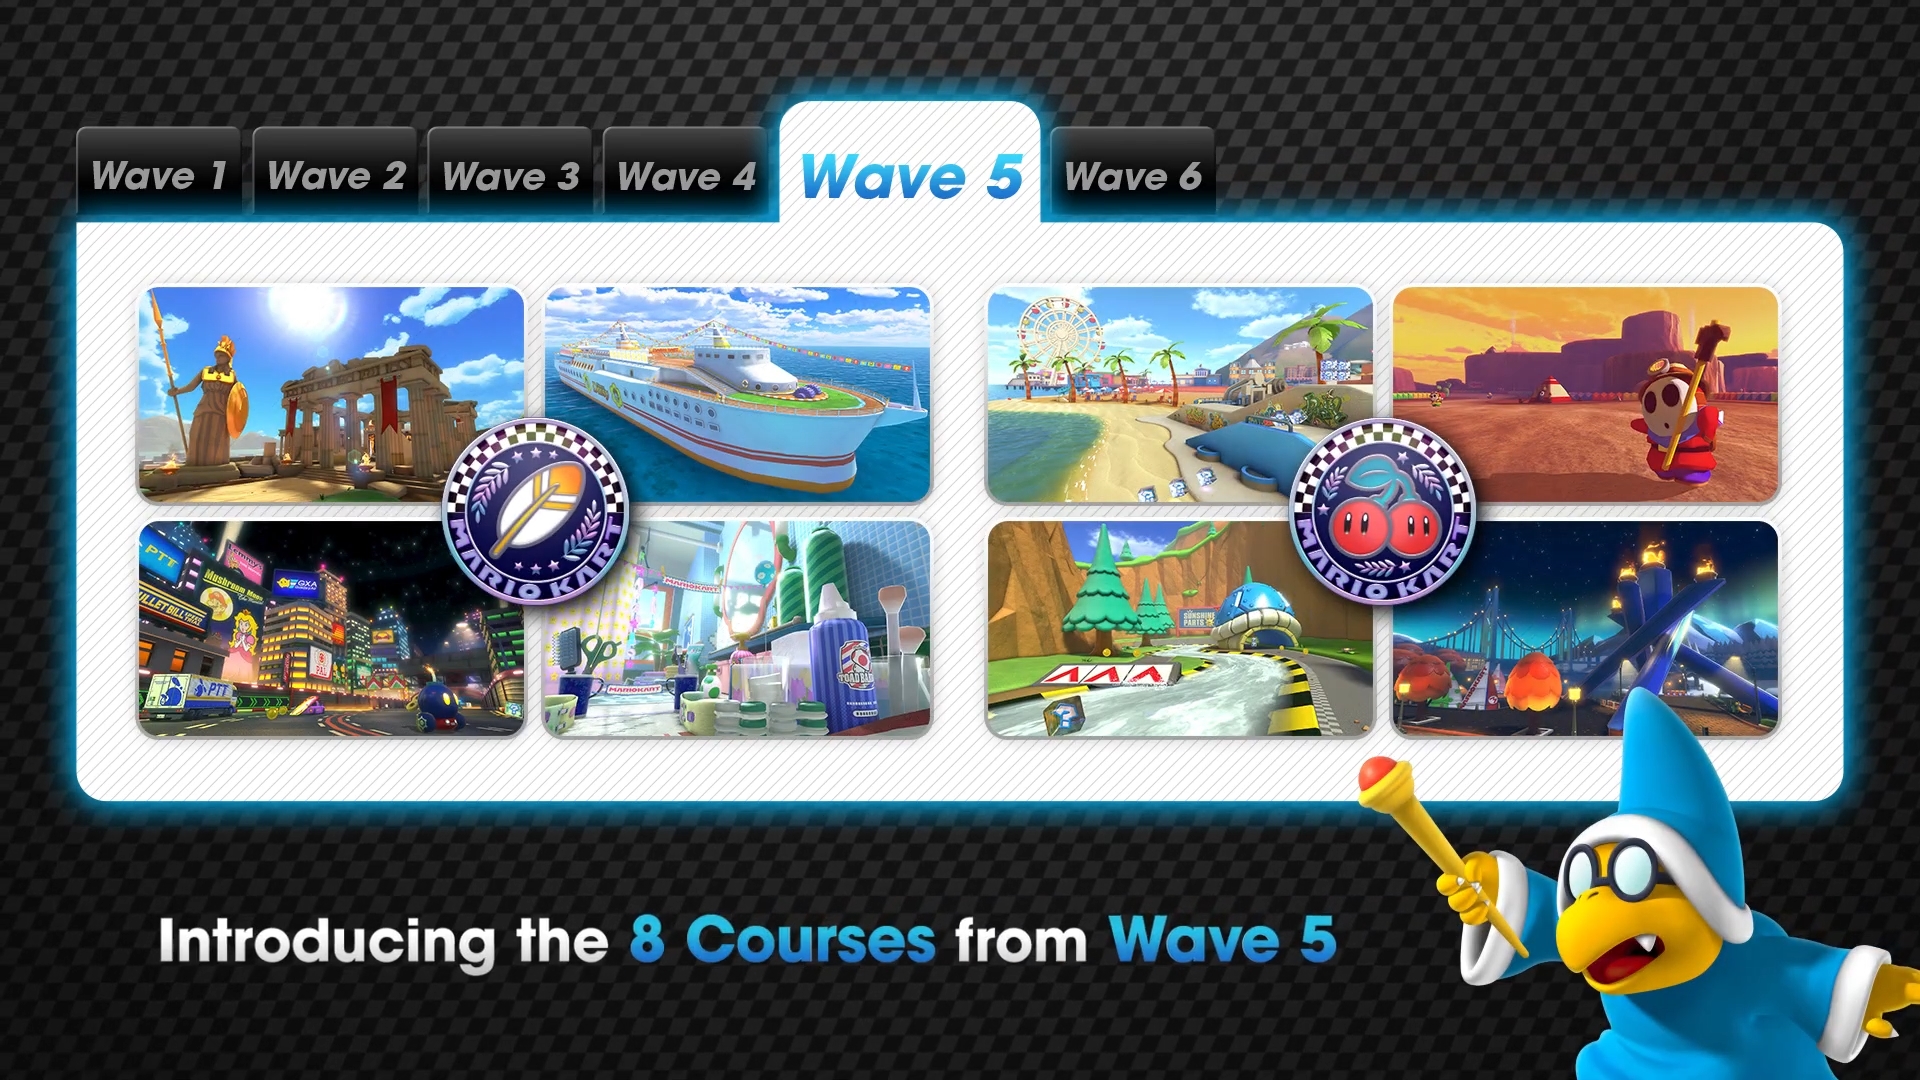 Mario Kart 8 Booster Course Pass Wave 5 Releasing Next Week; Course List Revealed